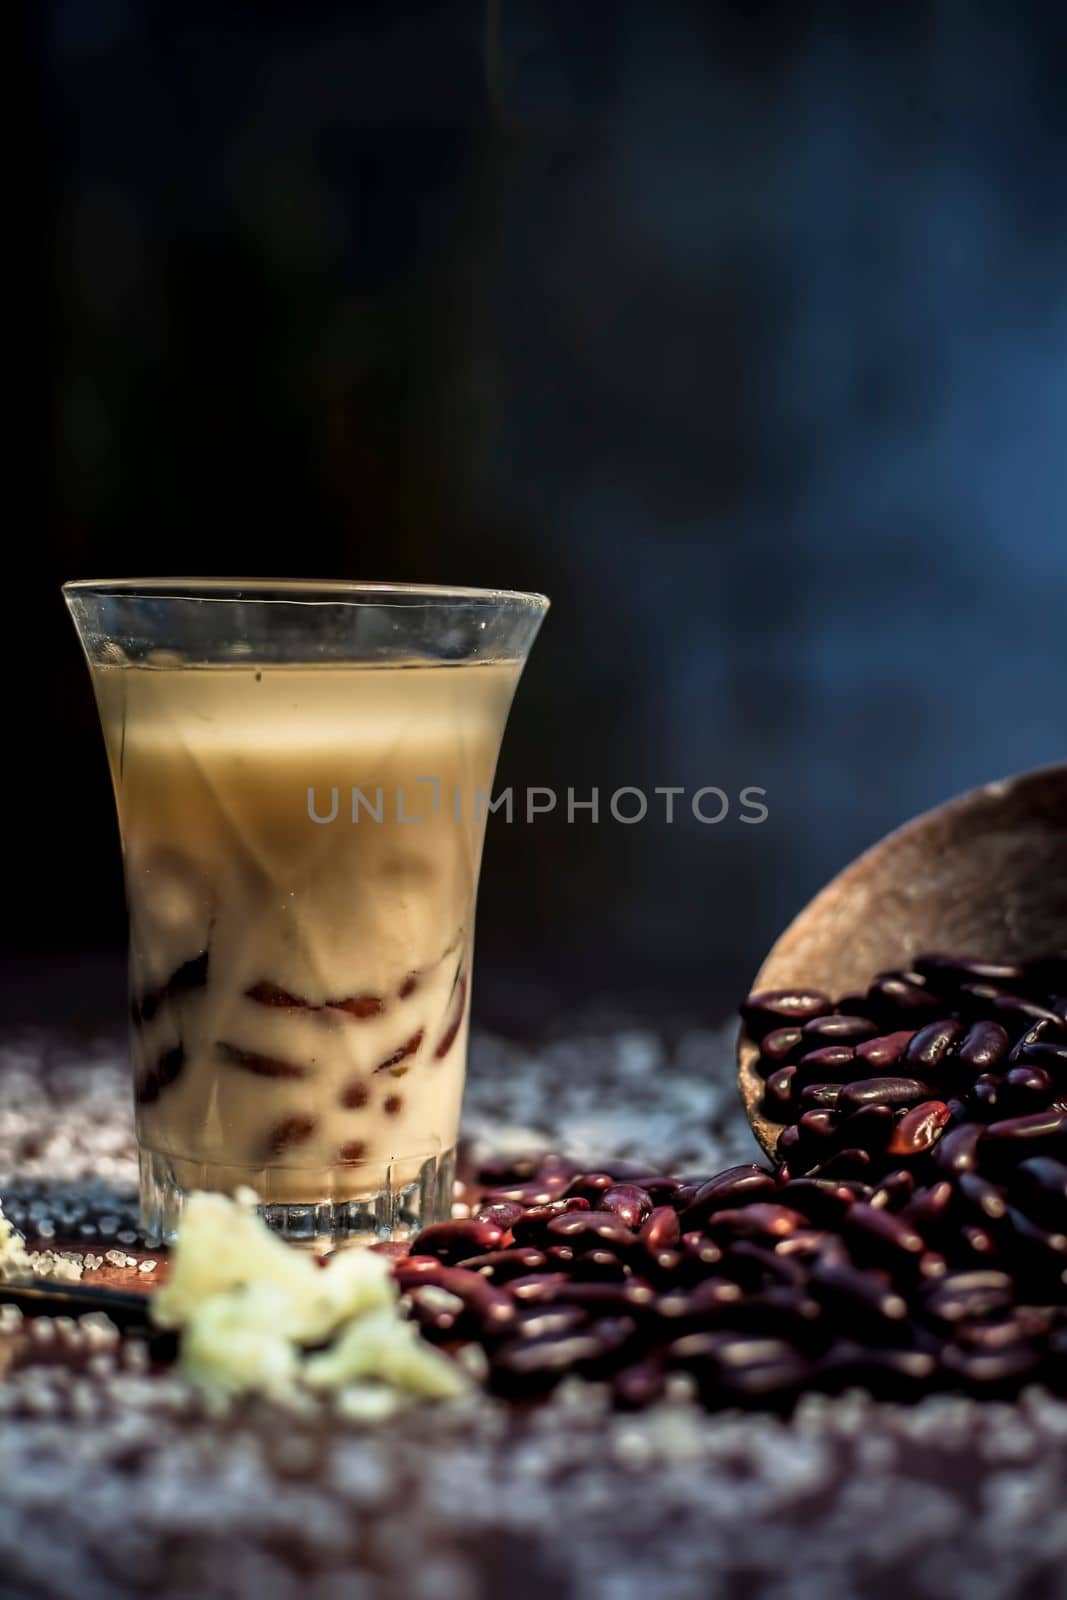 Red bean bubble tea in a glass along with some raw kidney beans, butter and sugar on the brown surface with Rembrandt light technique. Vertical shot.